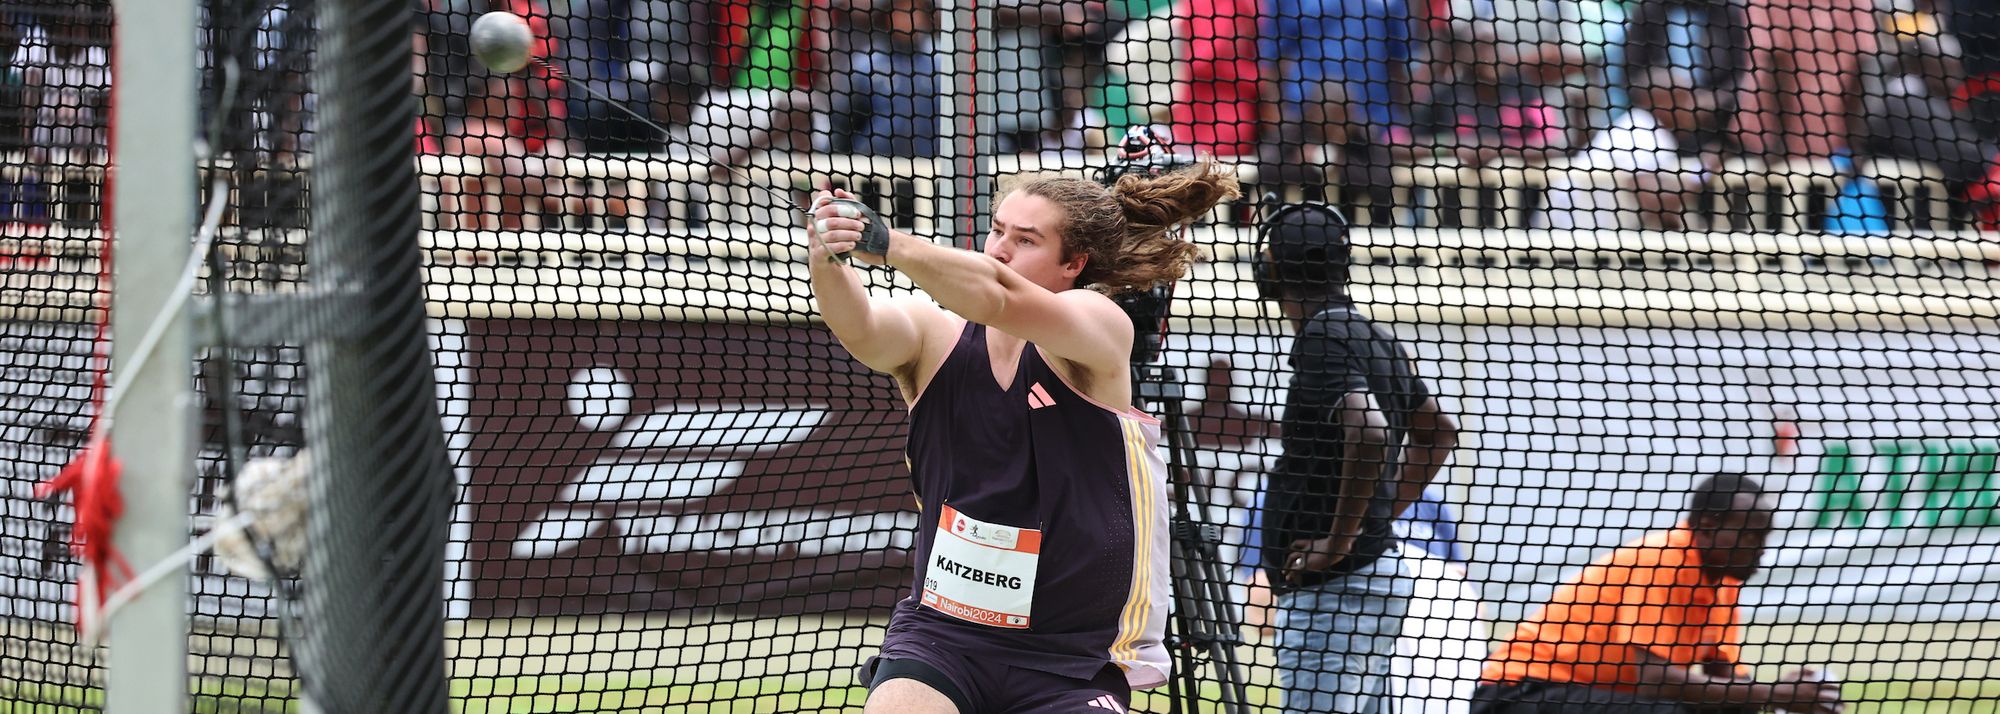 World champion Ethan Katzberg threw 84.38m – the farthest mark since 2008 – to move to ninth on the world all-time list